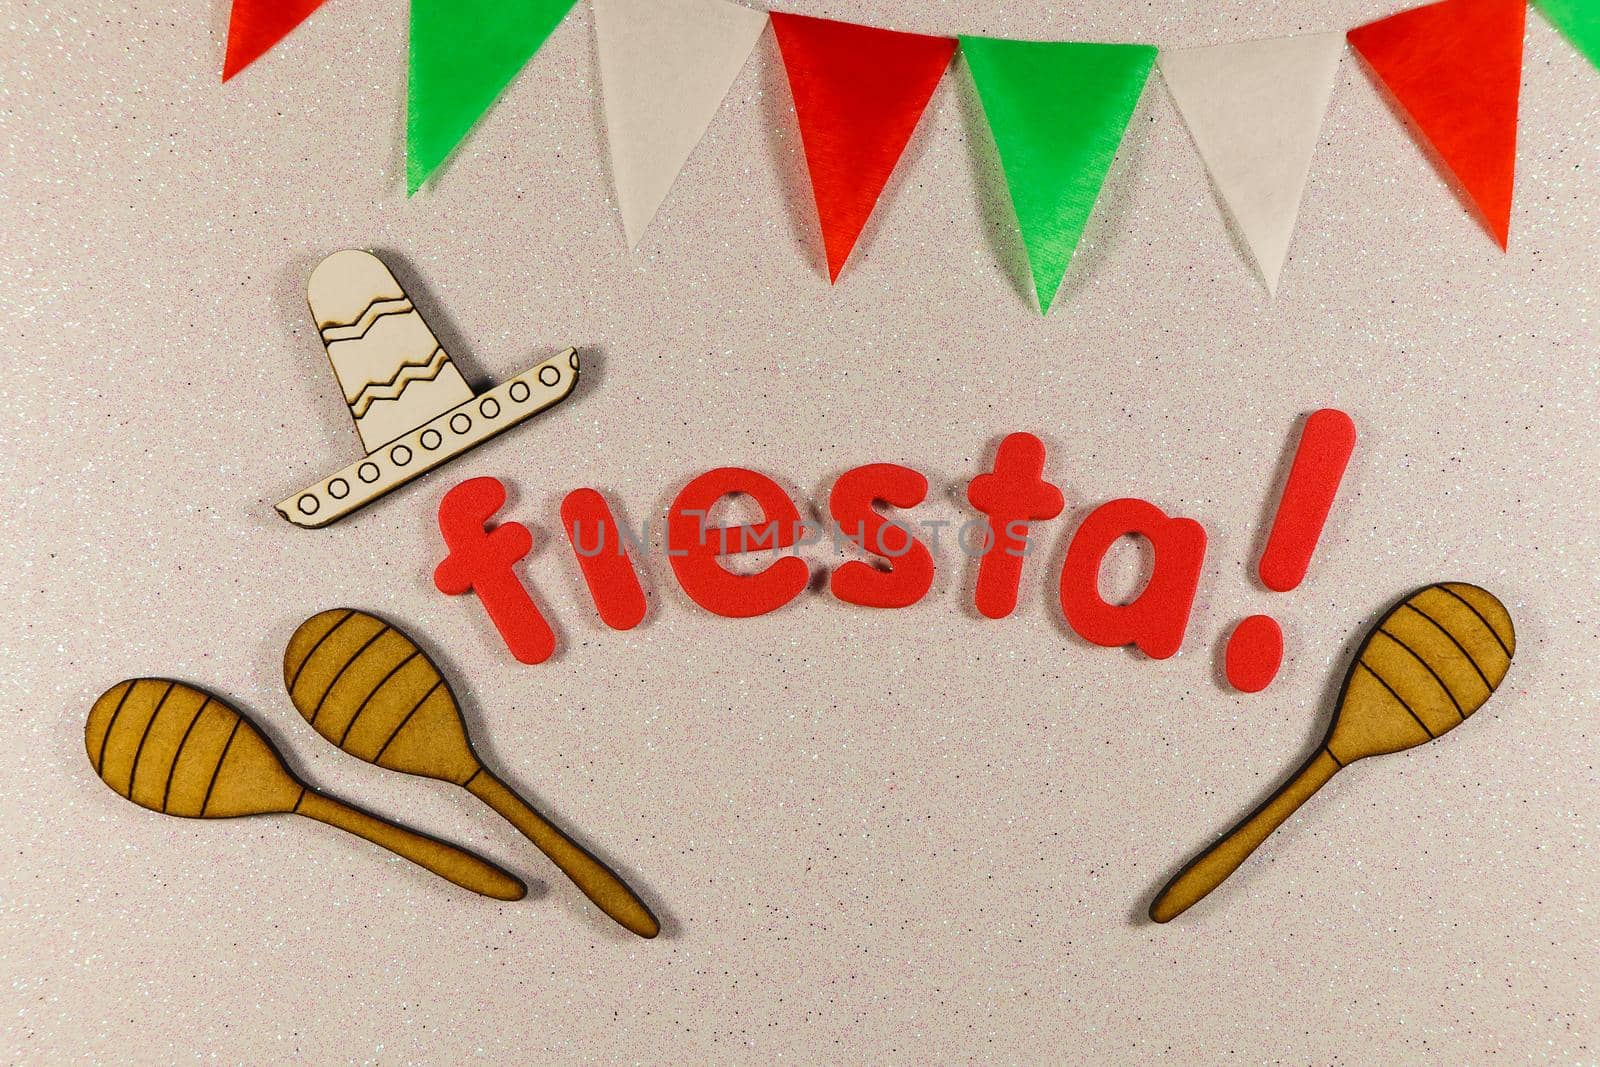 Mexican Fiesta Theme Layout With Sombrero And Maracas by jjvanginkel